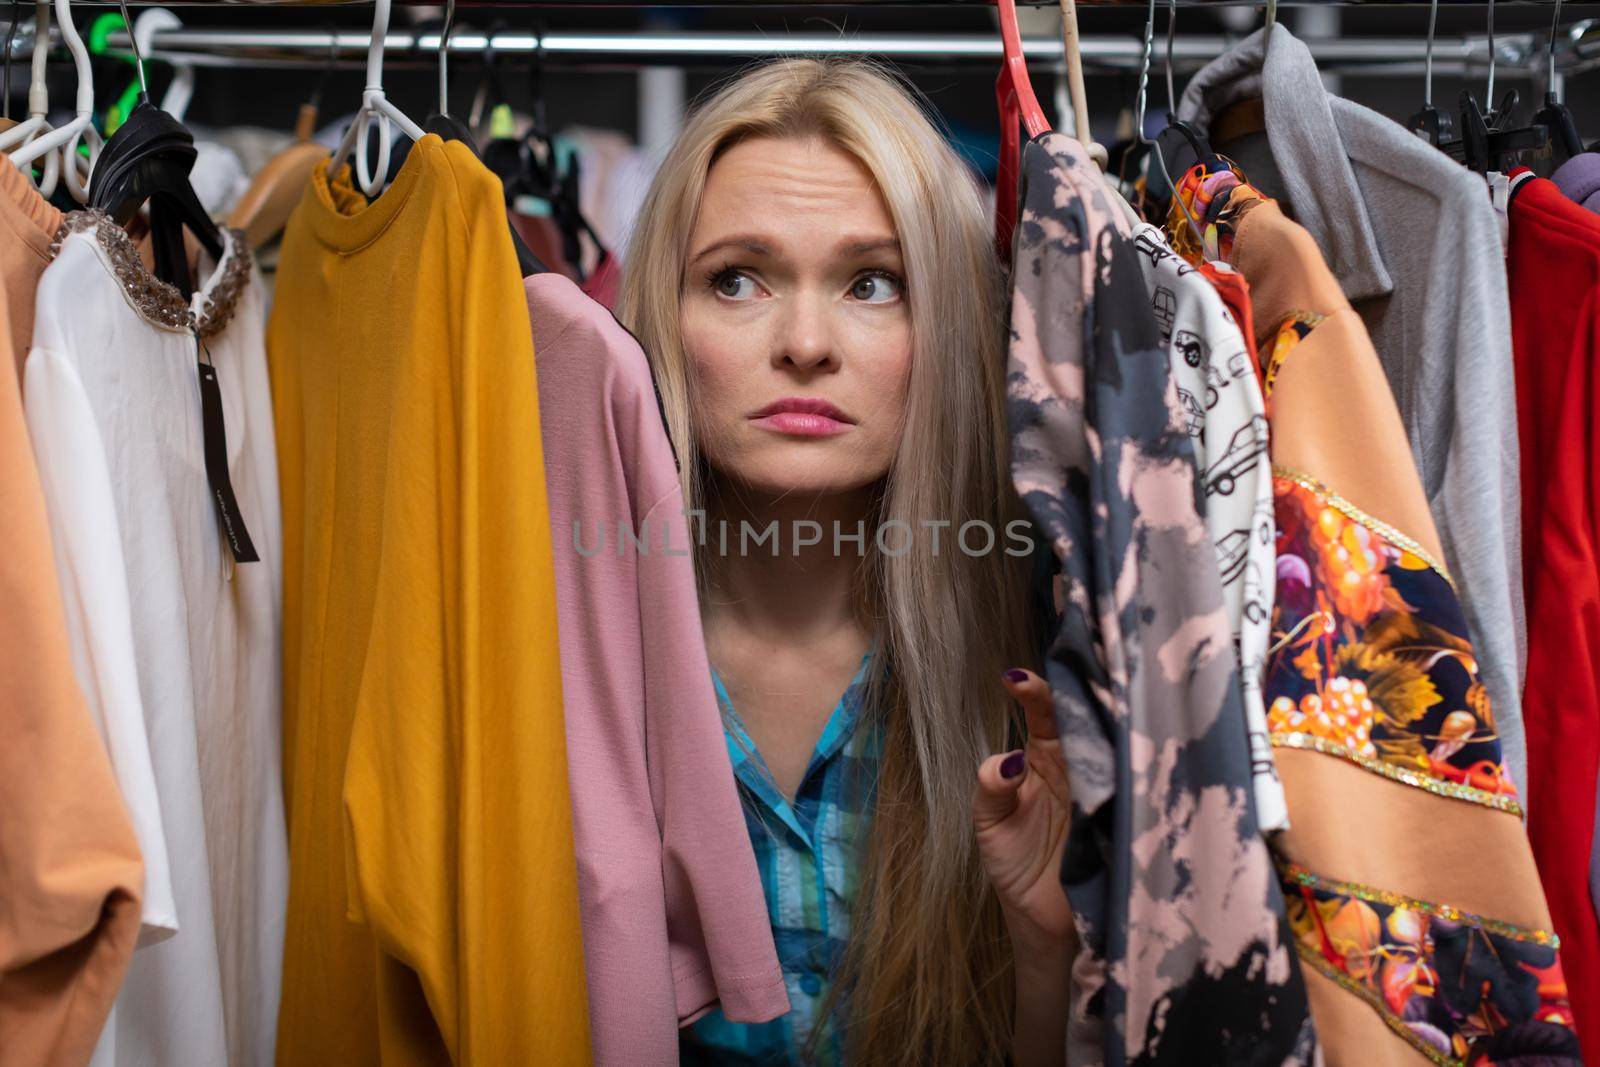 A woman with blonde hair, disappointed with shopping at the mall. by fotodrobik